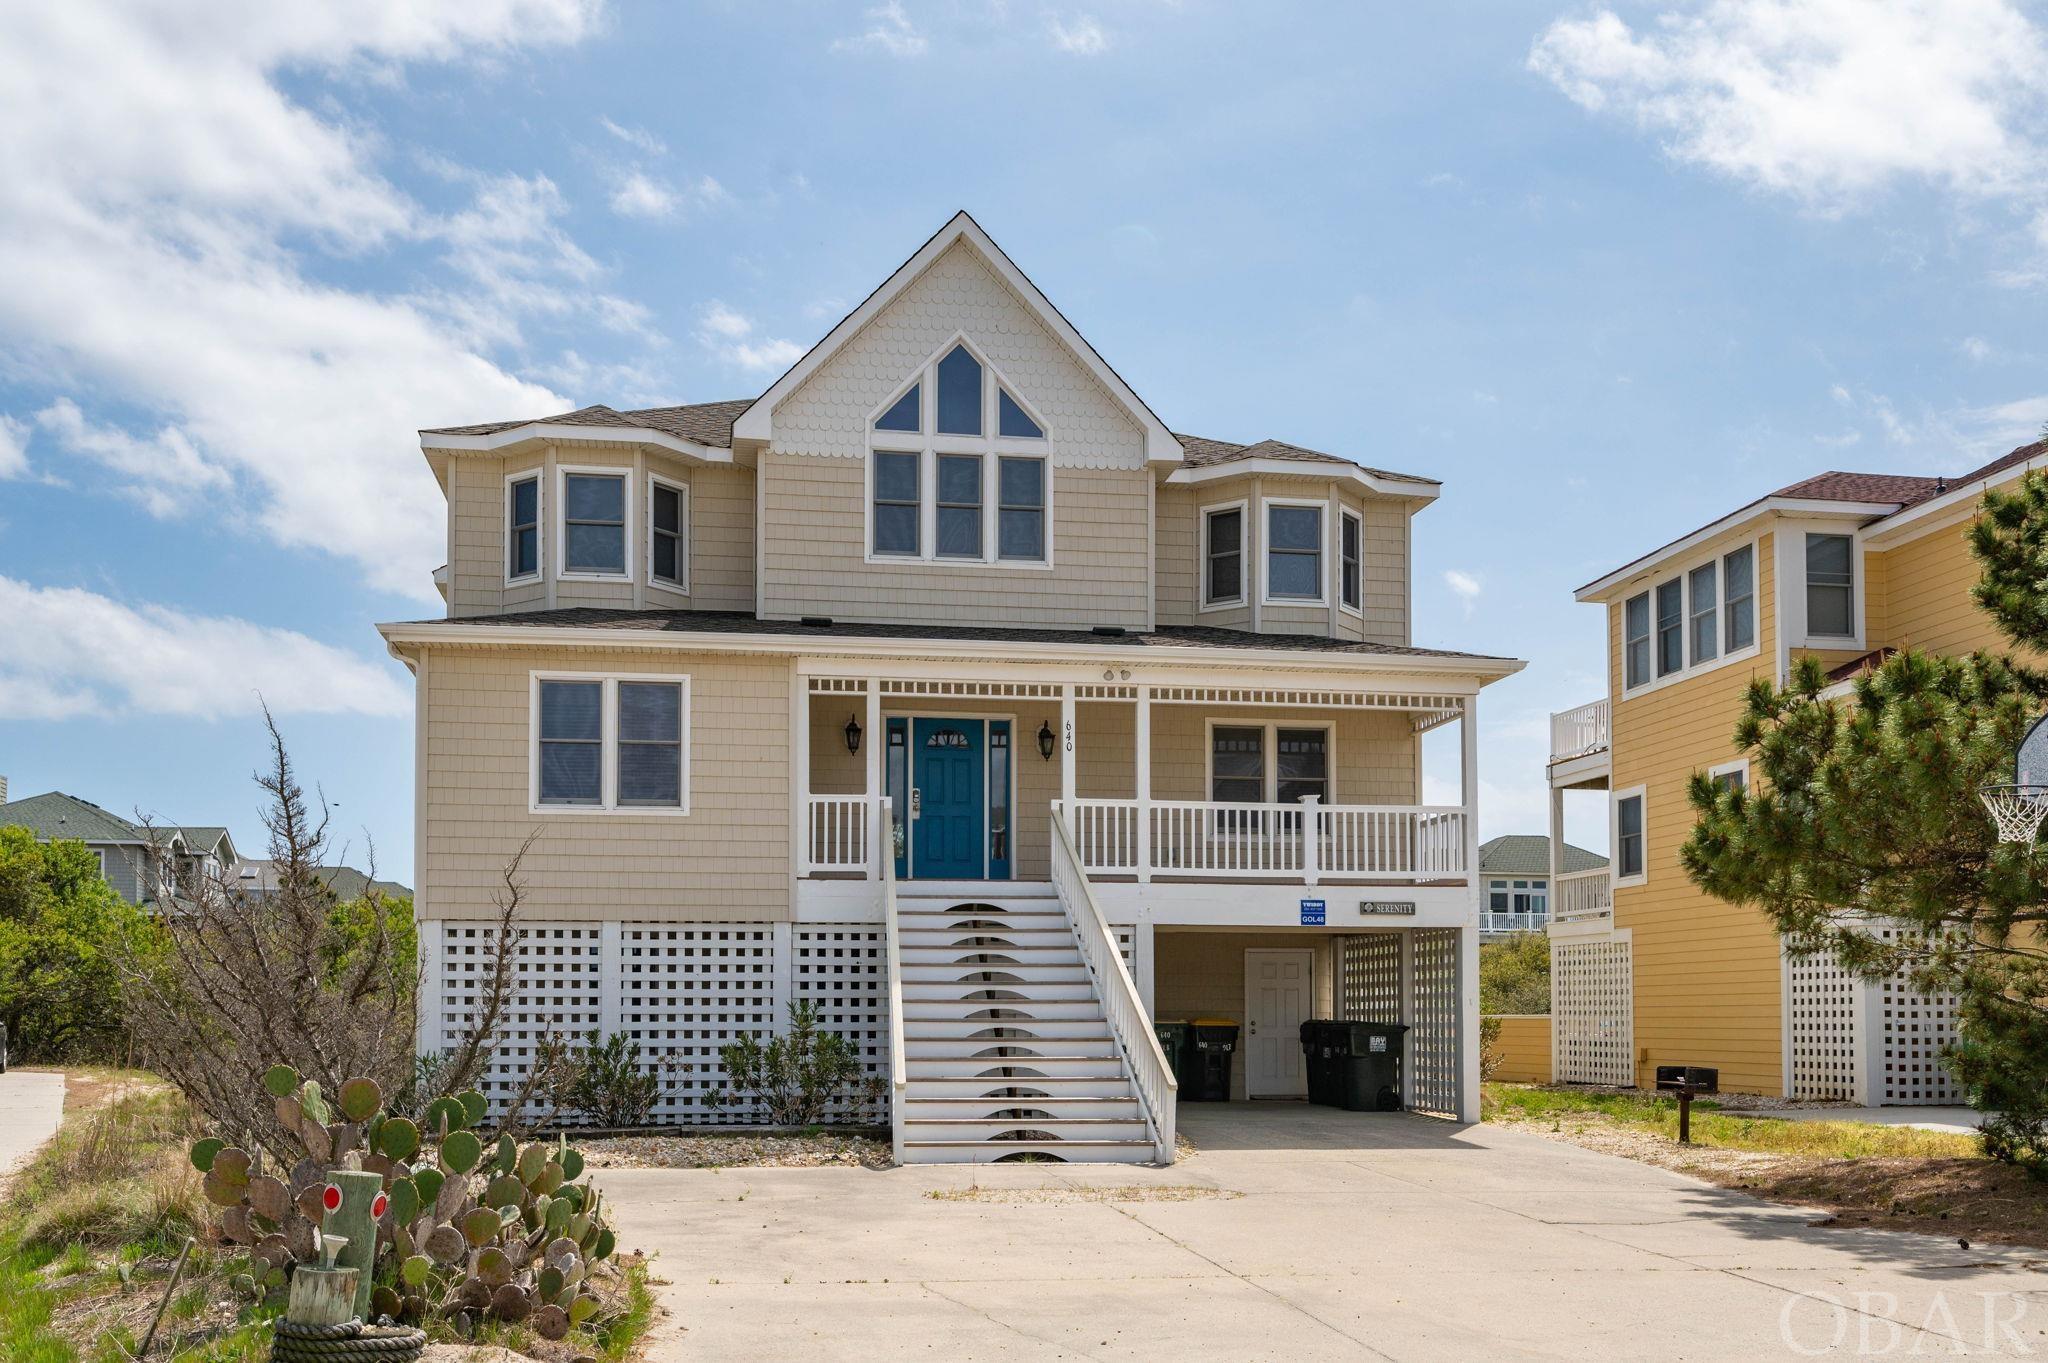 Lowest price per Square Foot of any Corolla semi-oceanfront!  Located in the desirable Ocean Lakes section of Ocean Sands, this 7-bedroom turnkey home features ocean views and is just steps to the beach. Enjoy the privacy of the Ocean Sands green space behind the home and the convenient location of the beach boardwalk at the end of the driveway.  The upper level of the home is comprised of a spacious open flow floor plan- family room with cathedral ceilings and fireplace; an oversized dining area; and the kitchen with breakfast bar seating and ample storage/counter space.  Enjoy ocean views from the Ships Watch or step outside onto the ample sundeck to enjoy the morning sun rising over the Atlantic.  There is also a half bath on this level as well as the Primary en Suite.  This top-level bedroom boasts privacy, space, ocean views, and a separate bathroom with an oversized walk-in glass shower and double vanity.   Take the elevator down to the mid-level where you will find four more en suite bedroom with private bathrooms, and another bonus room/office set up as sleeping space.  An ocean side covered deck runs along the southern elevation, providing convenient access to the new mid-level Jacuzzi Play hot tub.   The ground level features two more bedrooms that share a full hall bath, and a spacious rec room with wet bar and adjacent half bath.  The comfortable game room has plenty of room to play pool, stretch out and watch TV, or just relax and cool off after a day in the sun. “Serenity View” checks all the boxes for a vacation property- ocean views, open concept floor plan, large en suite bedrooms, elevator, and game room with wet bar.   Situated on an X flood zone lot and convenient to the attractions, shopping, and dining of the northern beaches, this vacation property offers the proximity, updates, and space the discerning buyer is looking for.